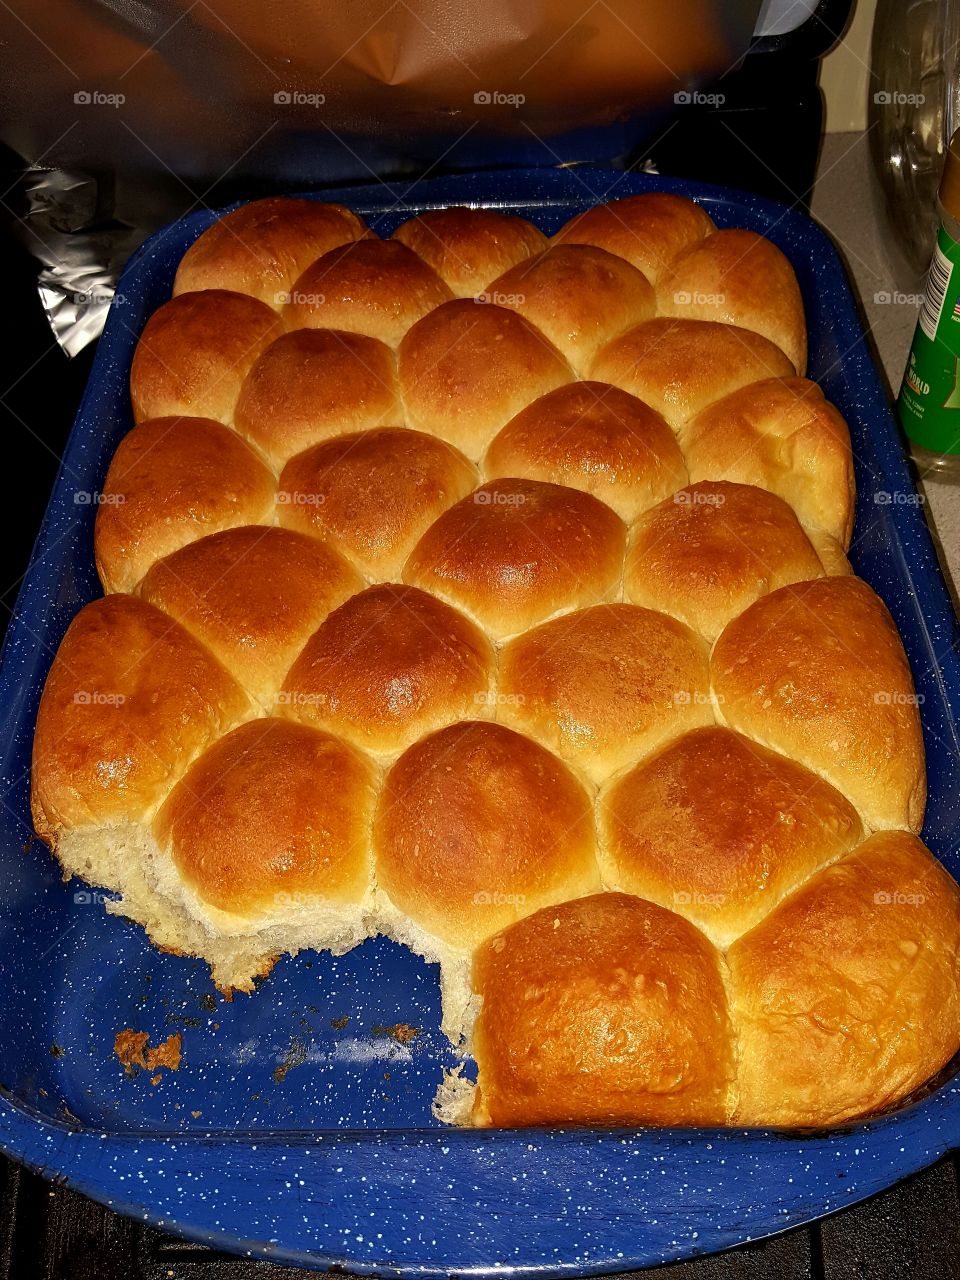 Thanksgiving rolls are so yummy!